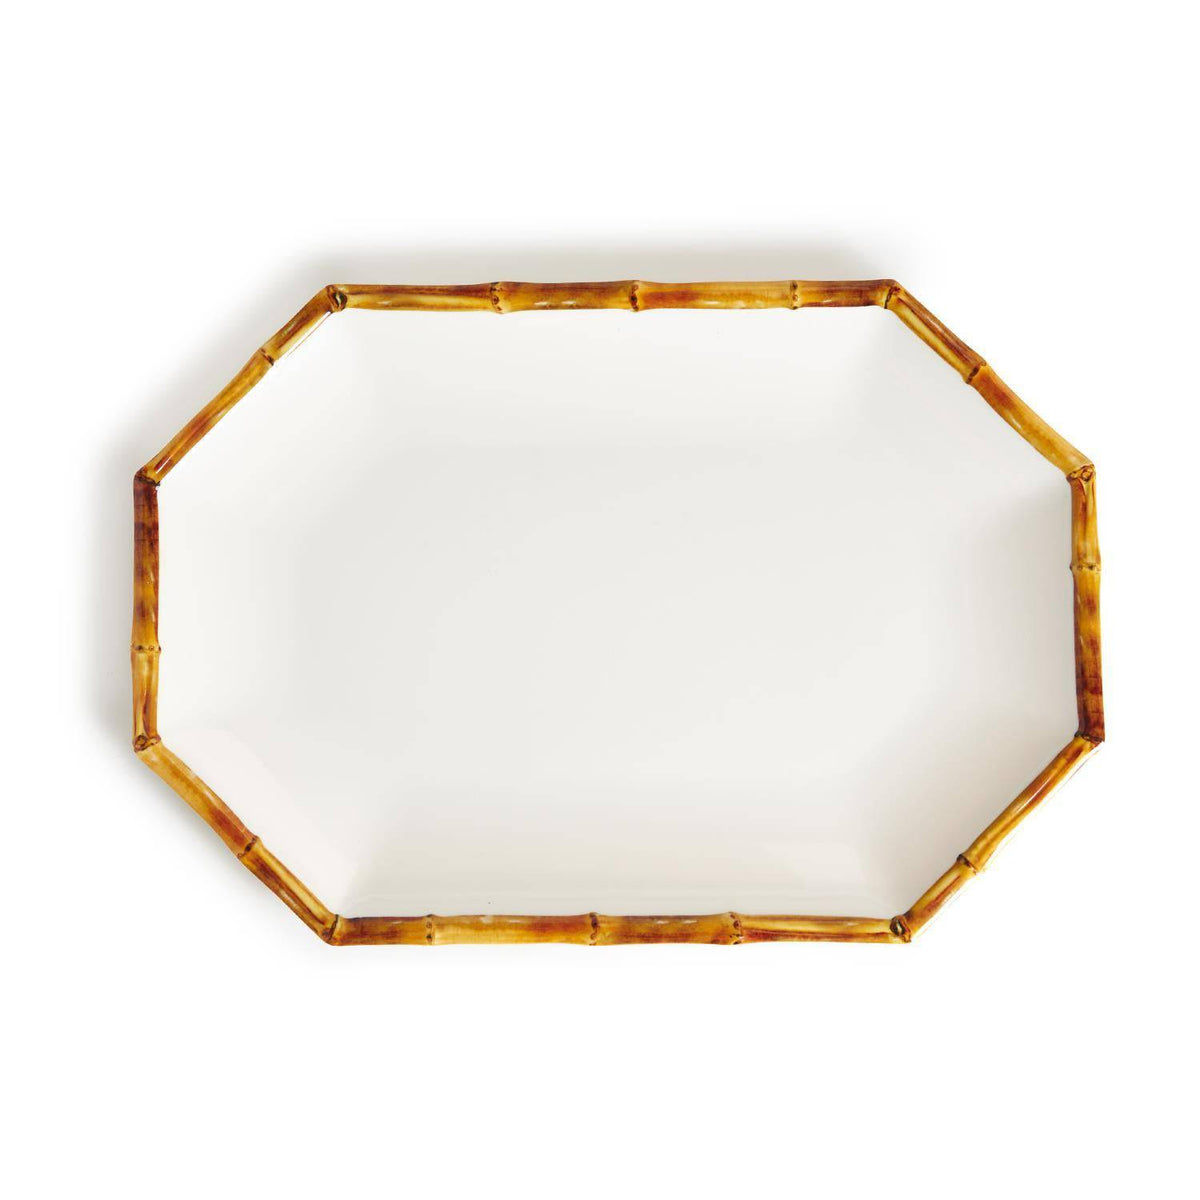 Bamboo Octagonal Serving Tray / Platter with Bamboo Rim - The Preppy Bunny